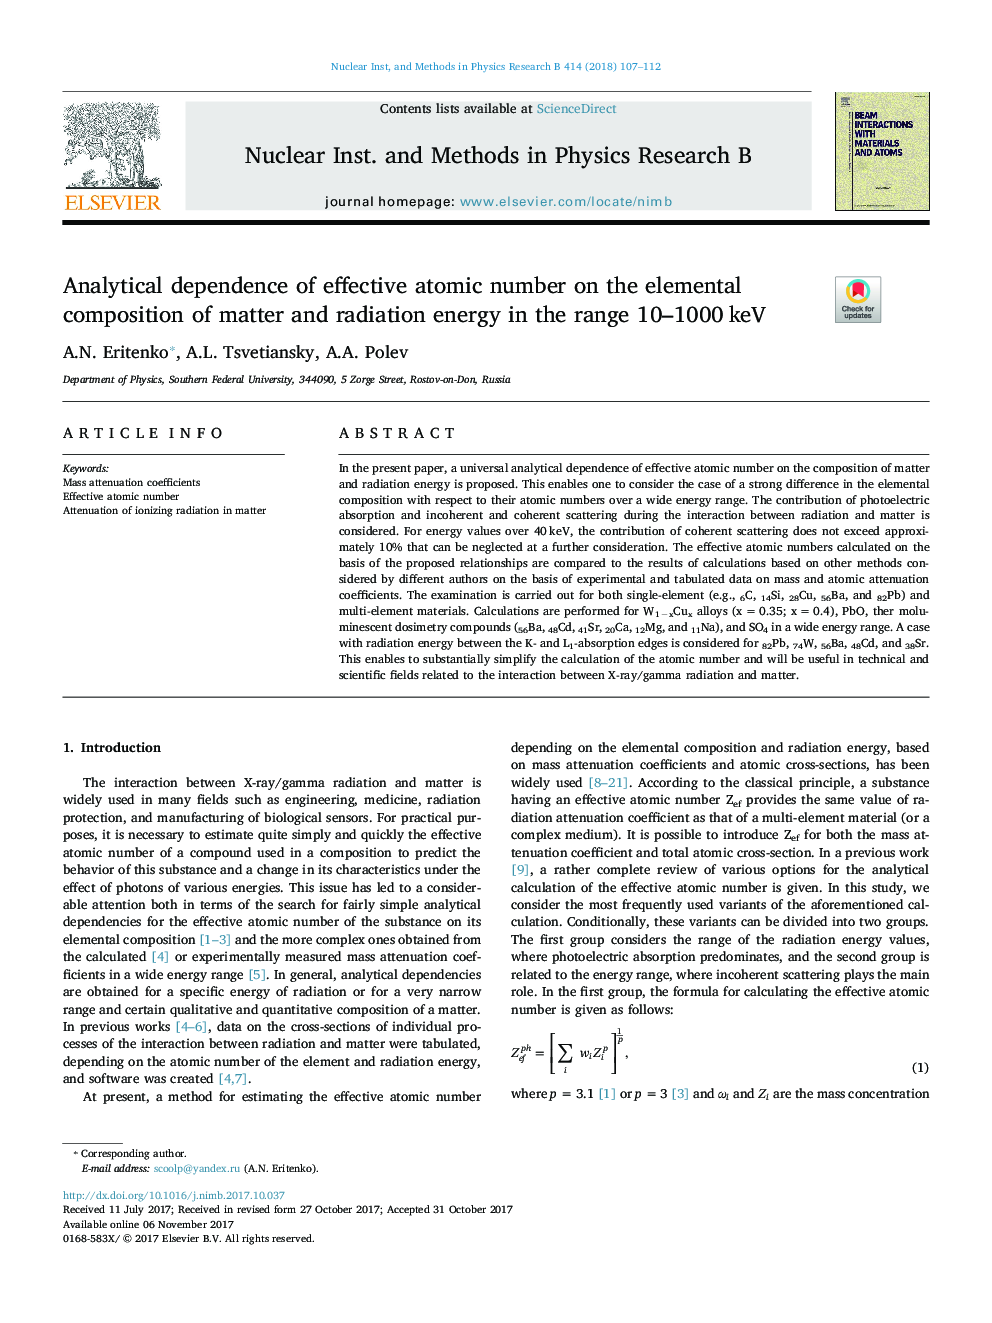 Analytical dependence of effective atomic number on the elemental composition of matter and radiation energy in the range 10-1000â¯keV